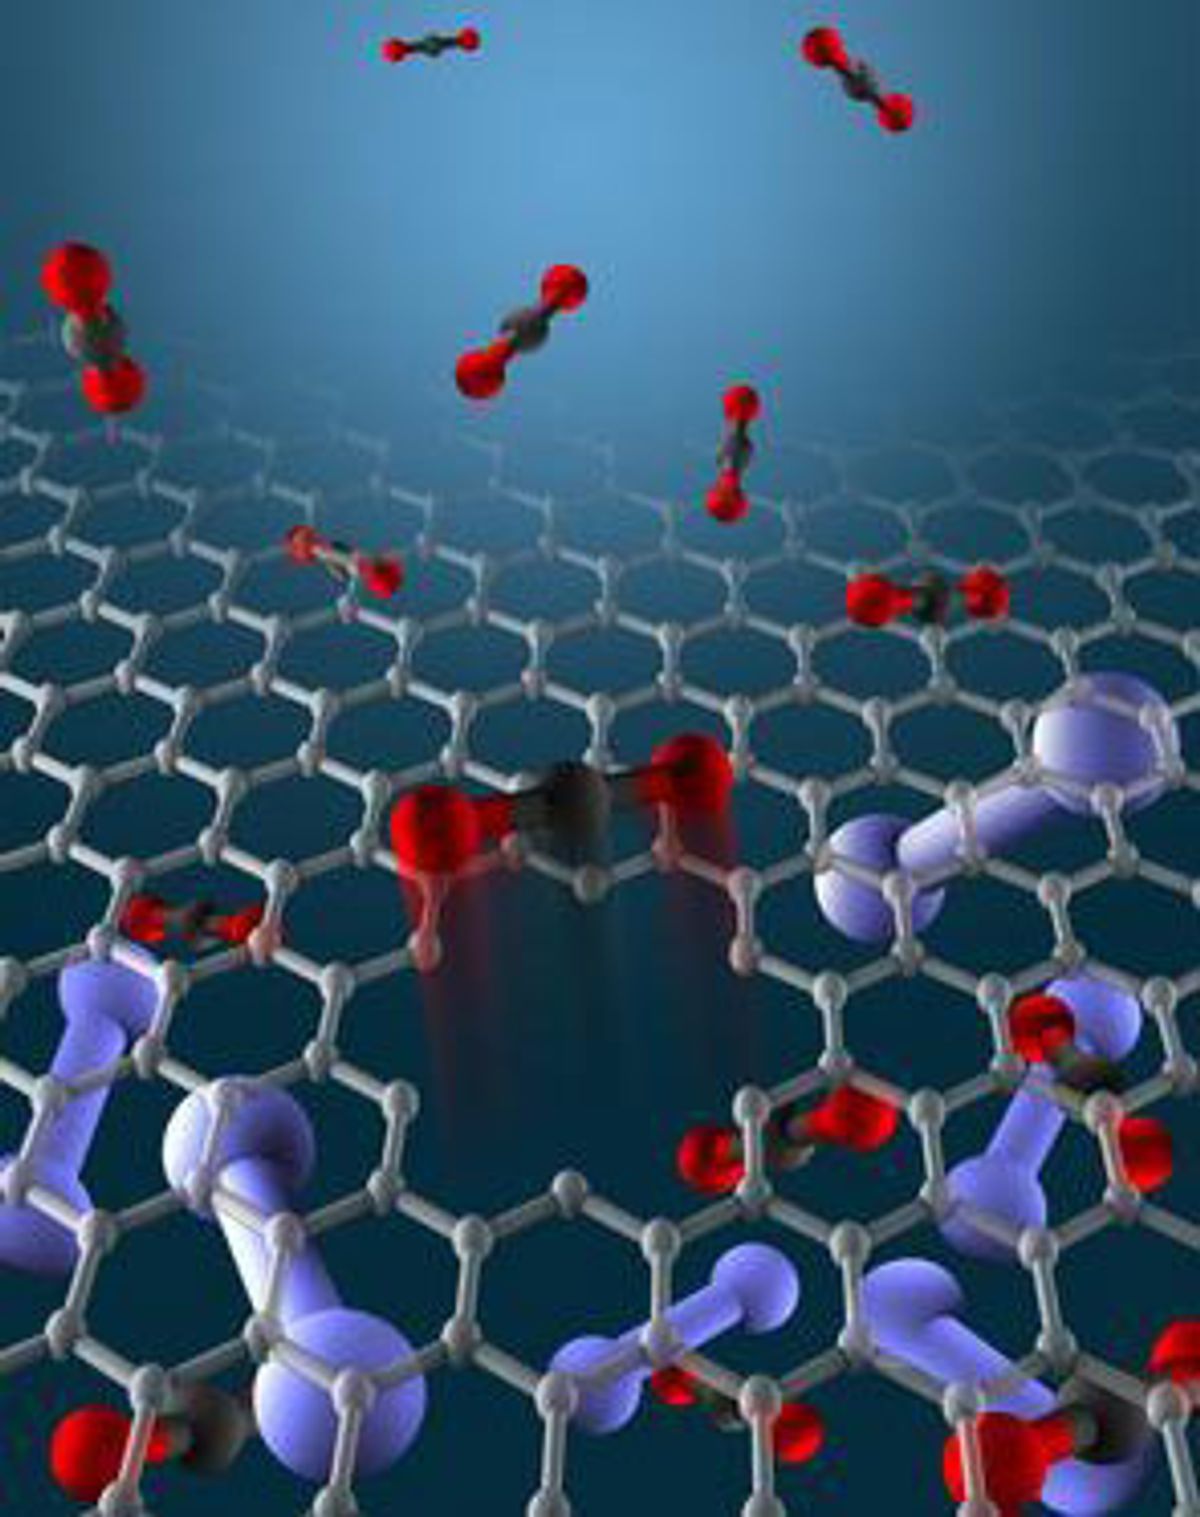 Graphene-based Gas Membranes Promise Reduced Carbon Dioxide Emissions